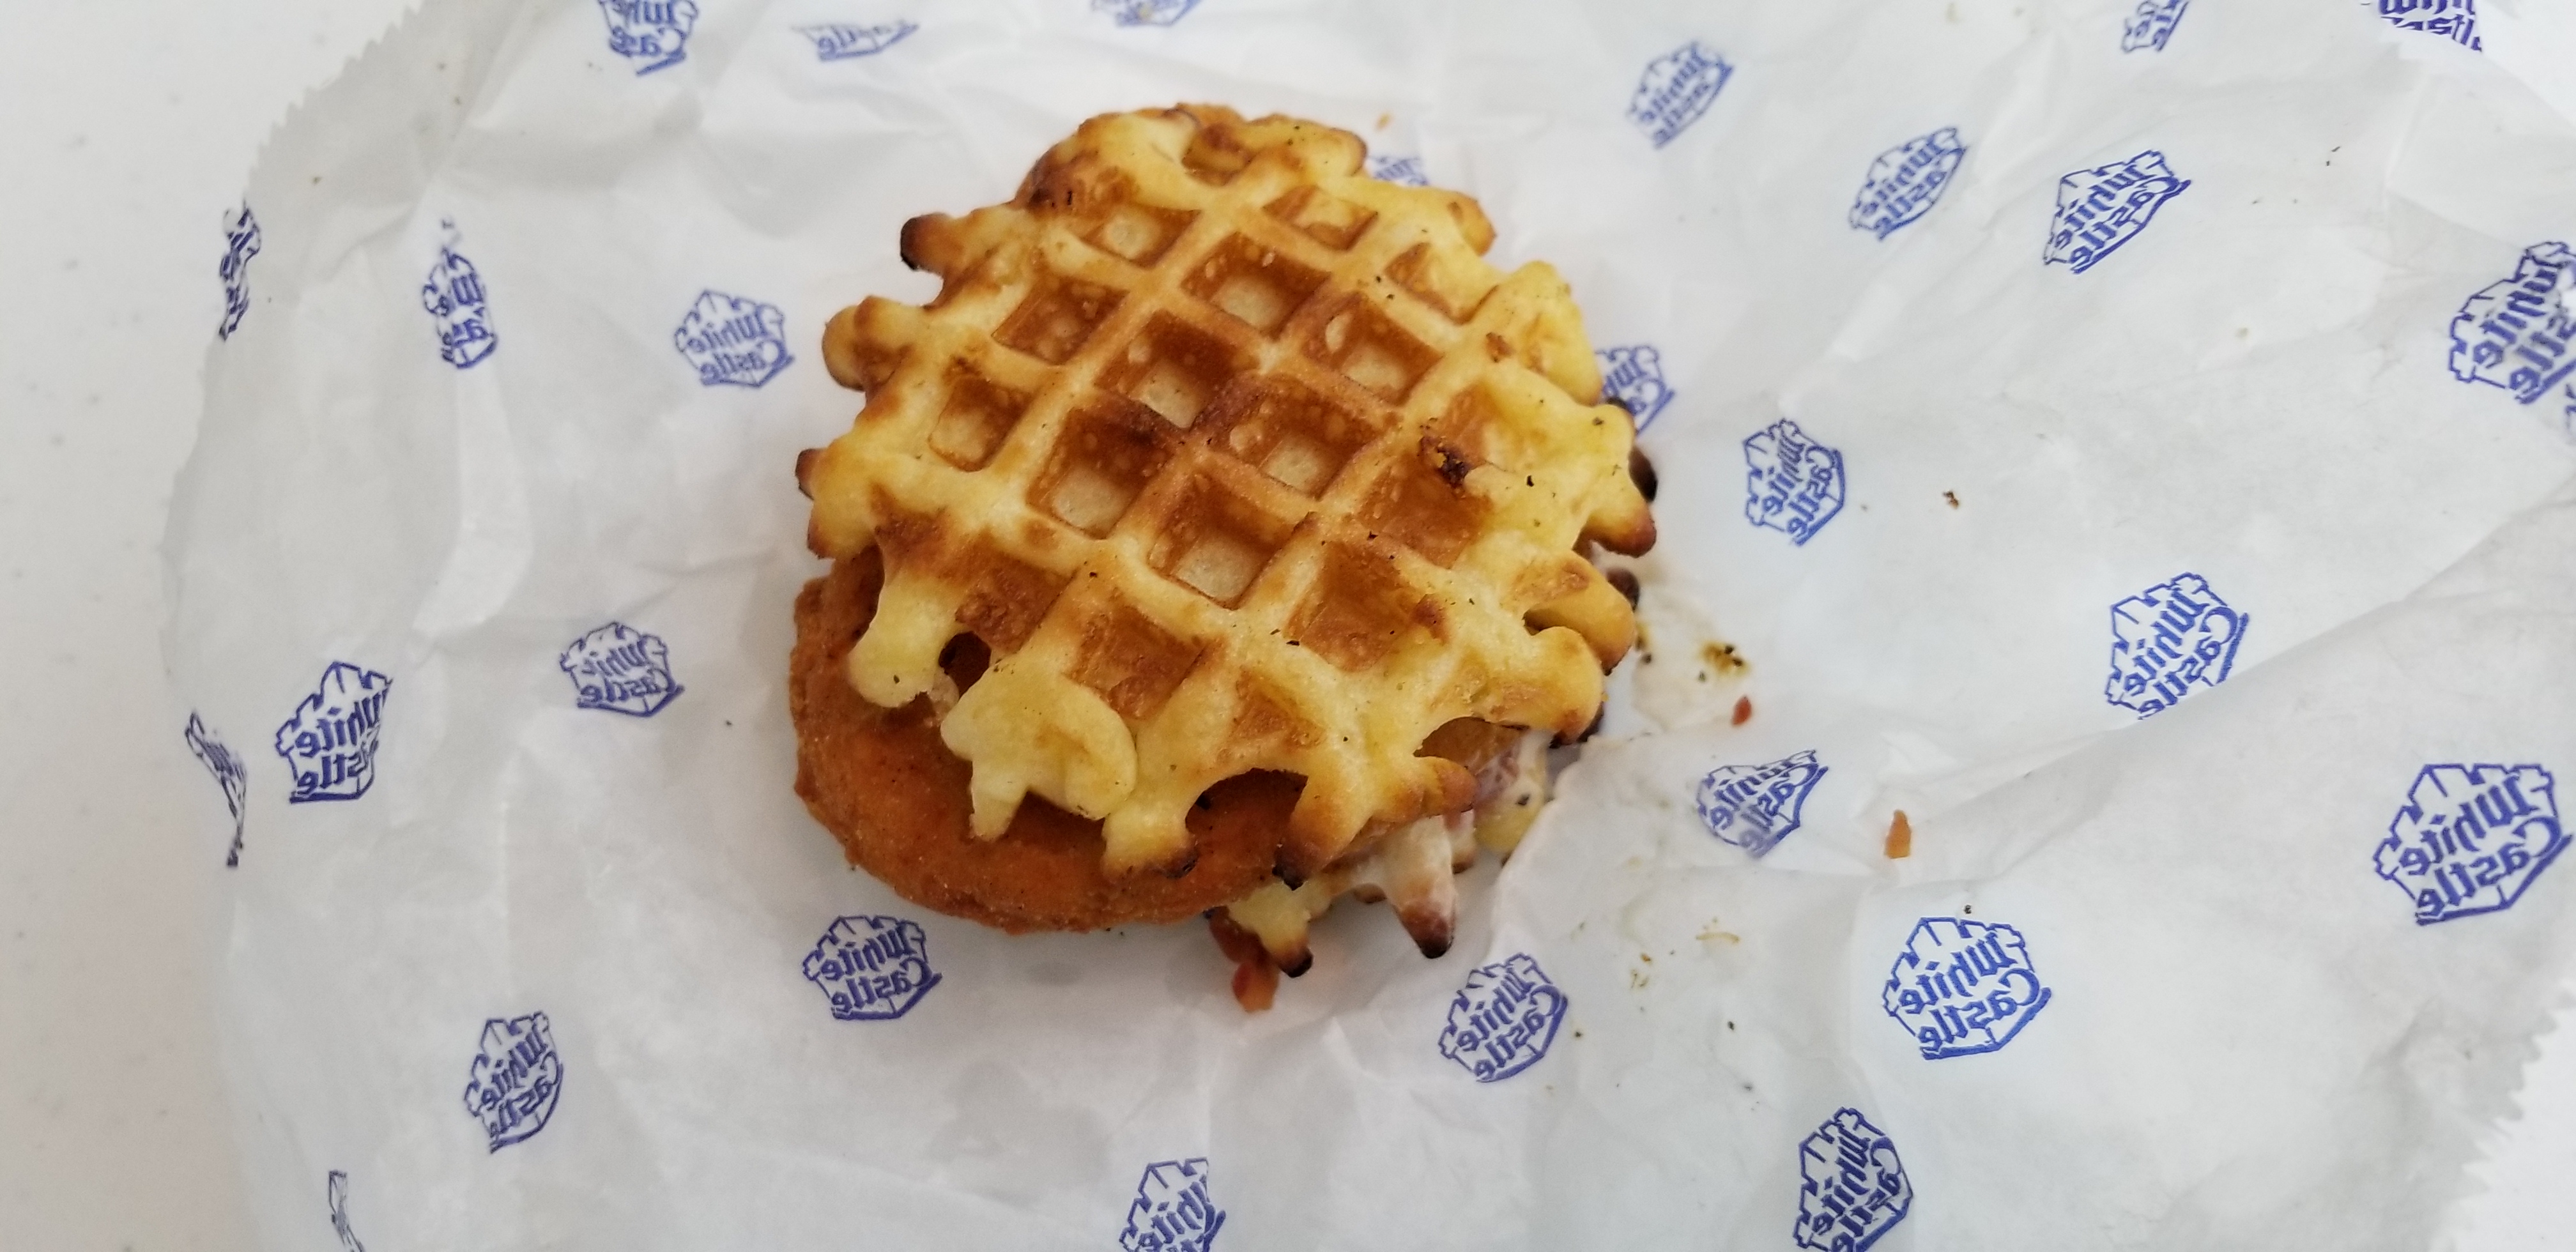 White Castle Chicken and Waffle Slider with Bacon